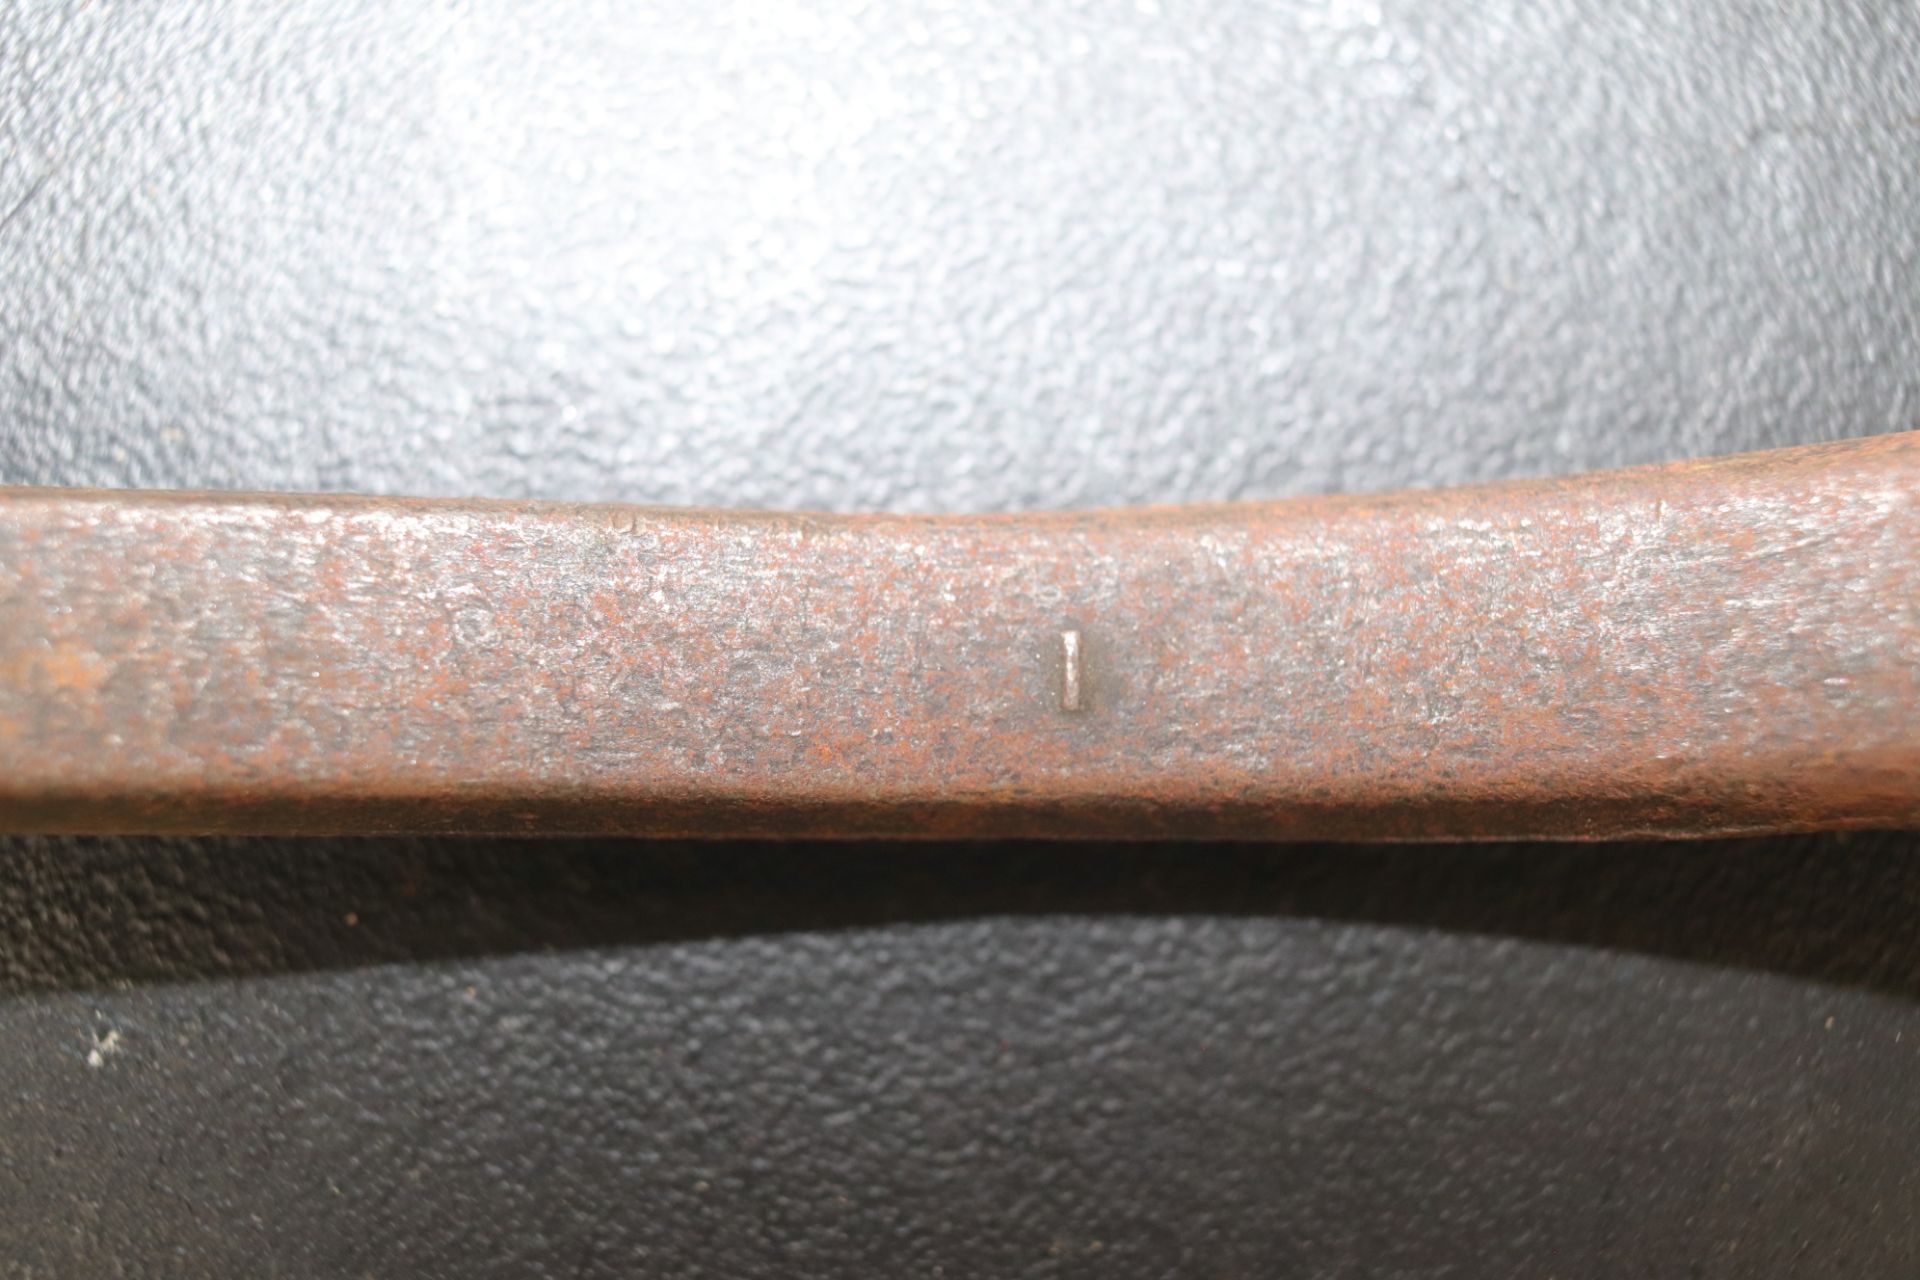 Ford Model T wrench - Image 6 of 6